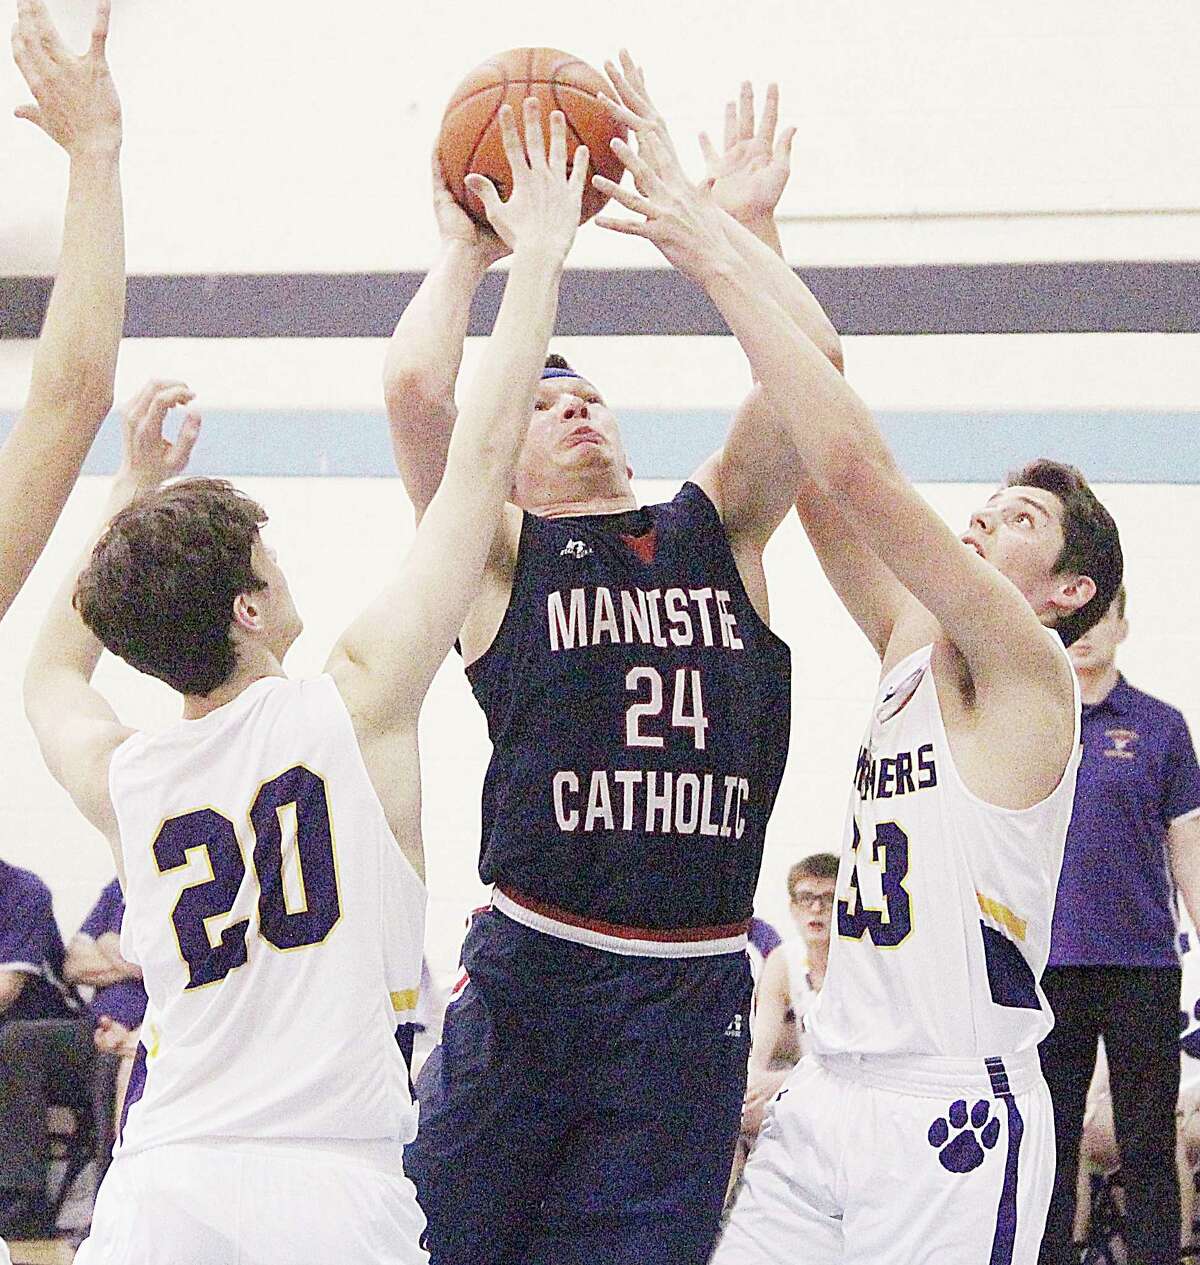 Manistee Catholic Central's Kyle Mikolajczak was named among the state's best Division 4 basketball players by the Basketball Coaches Association of Michigan. (News Advocate file photo)